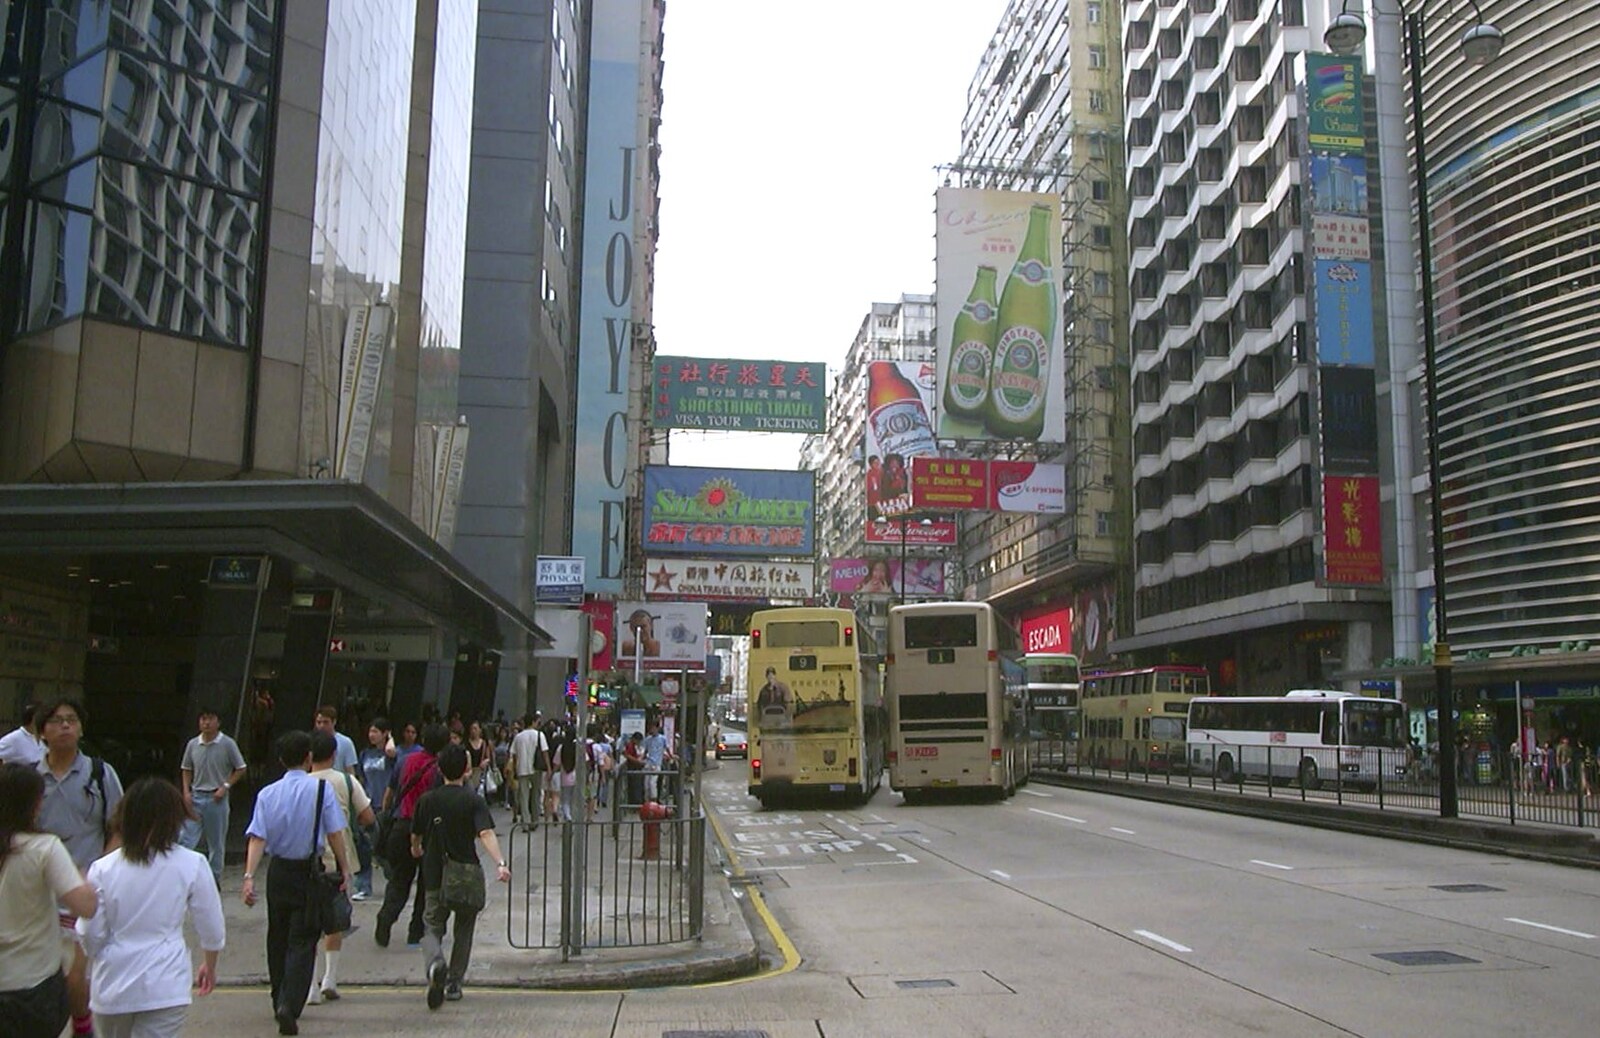 A Trip to Hong Kong, China - 11th August 2001: Near the bus station